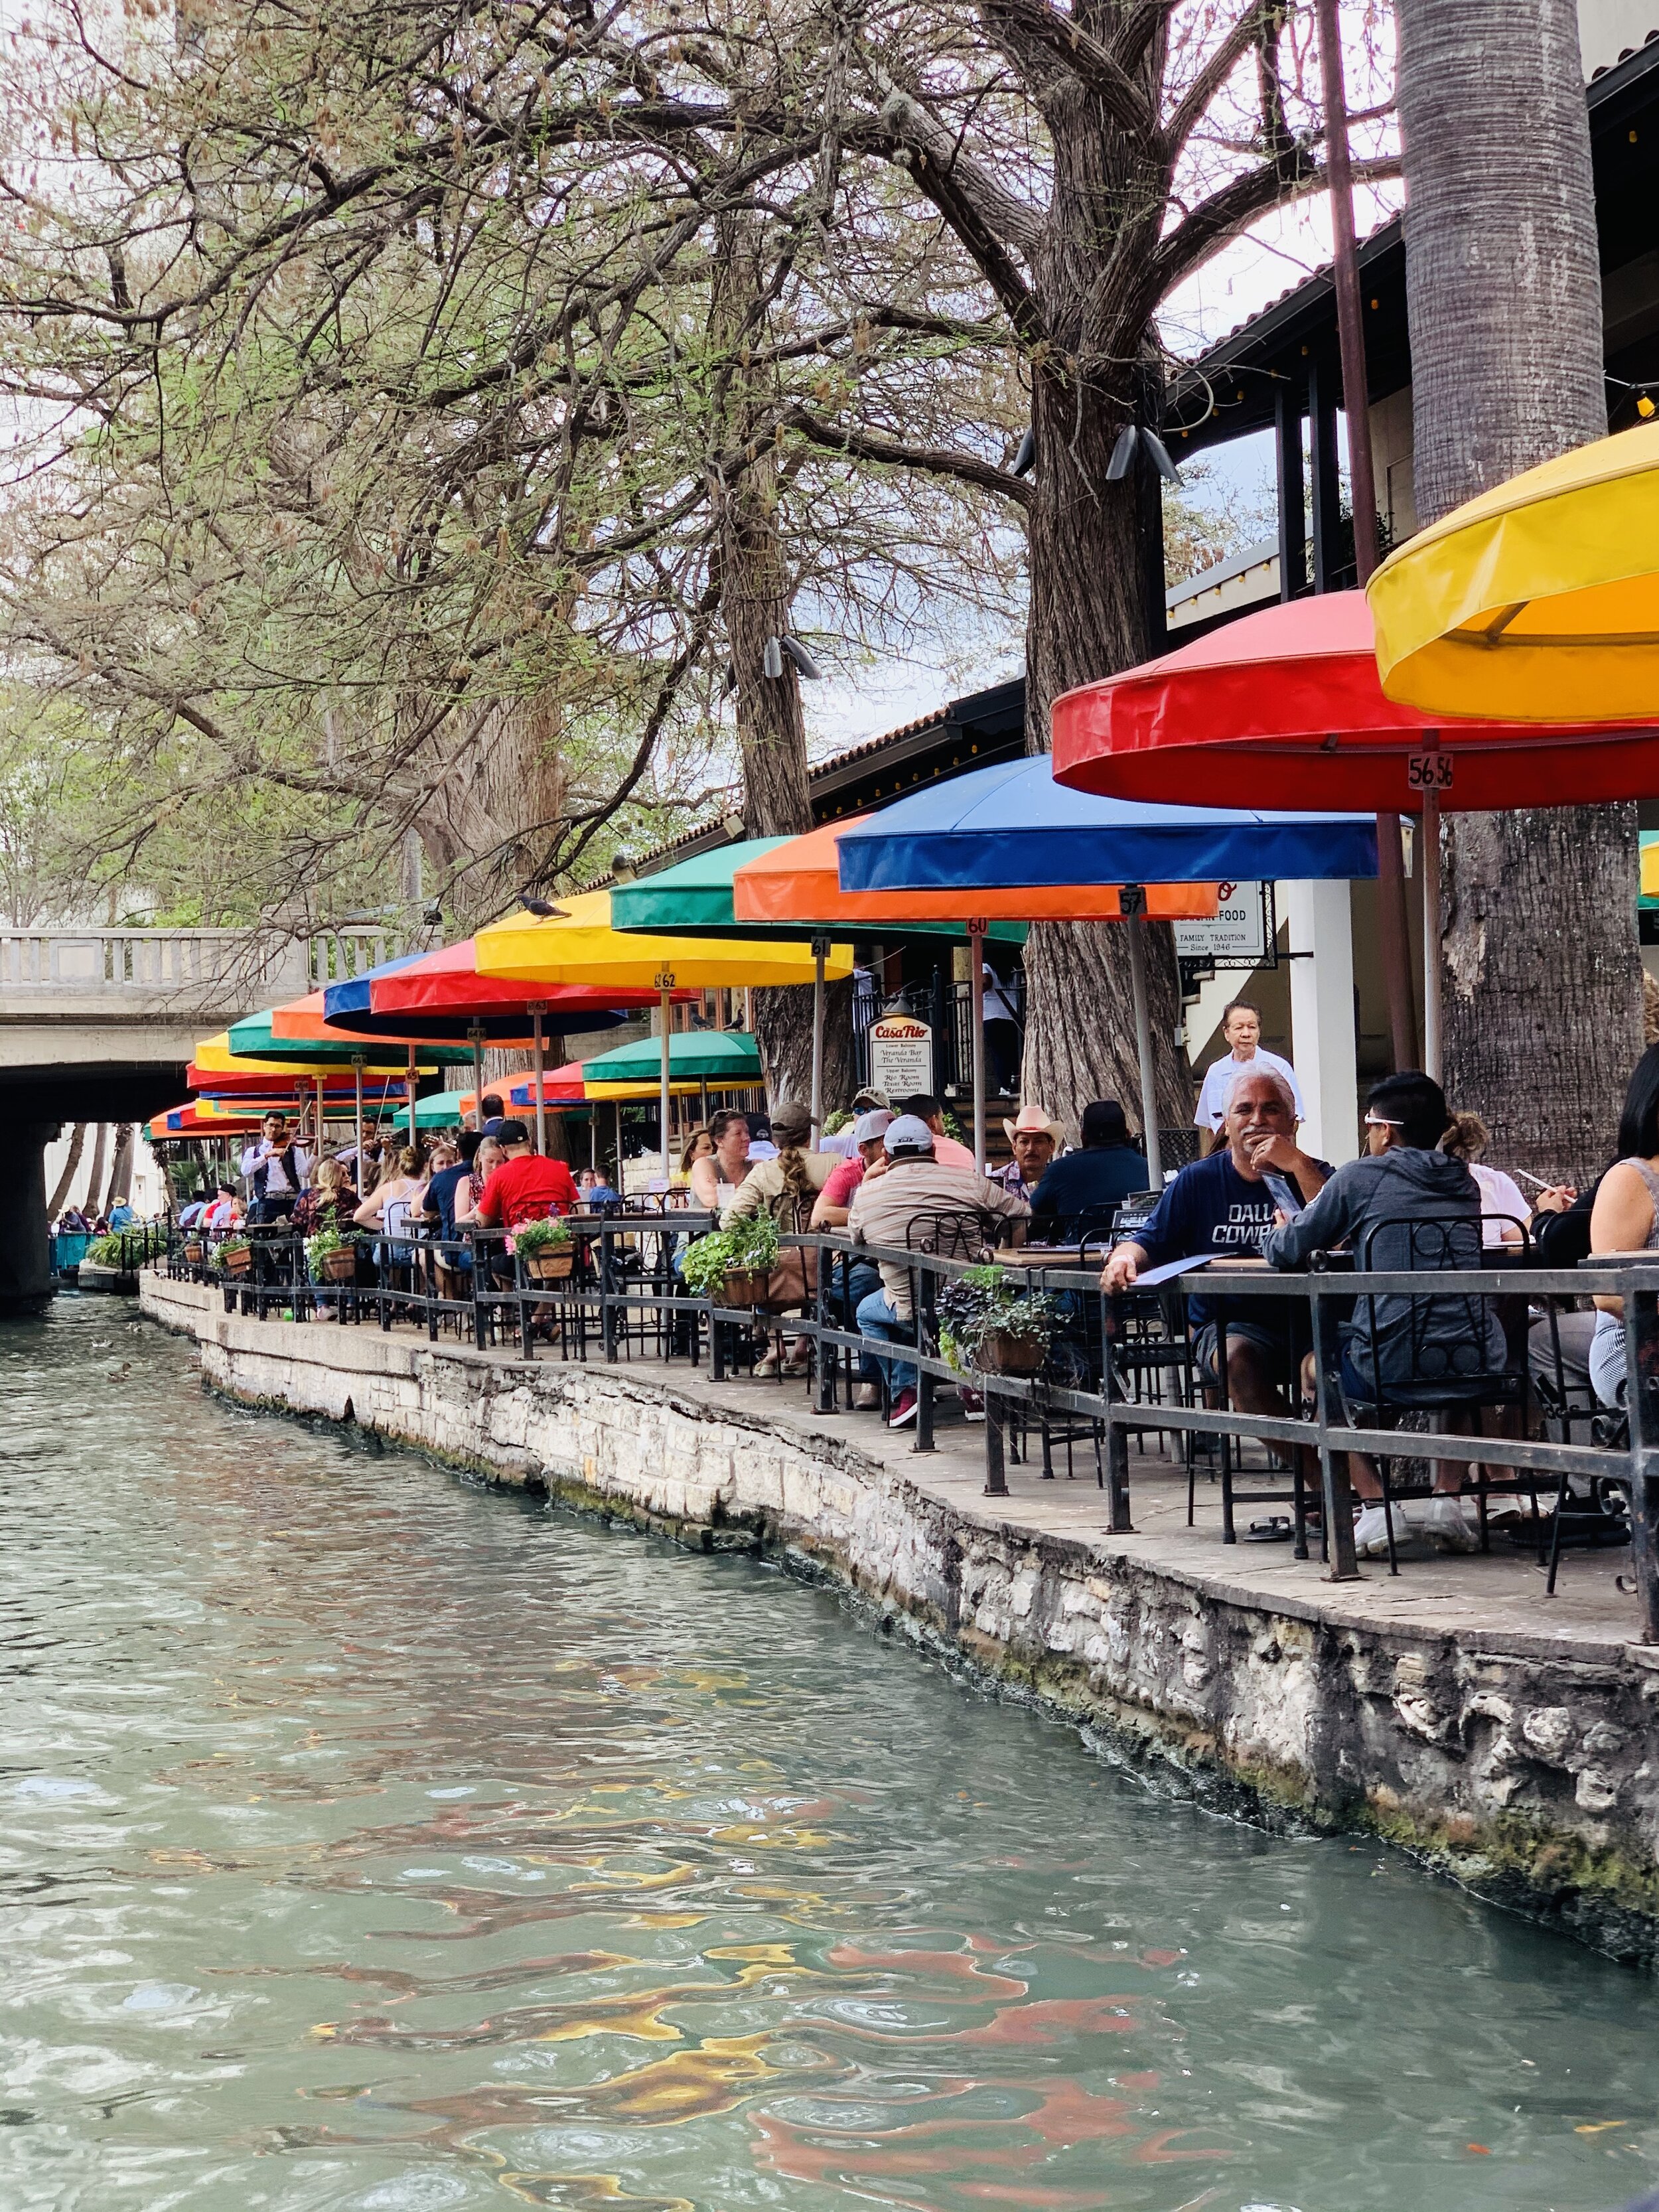  One of the iconic scenes of San Antonio’s Riverwalk, but the reduced crowd was not the scene anyone would have expected a few months ago. 